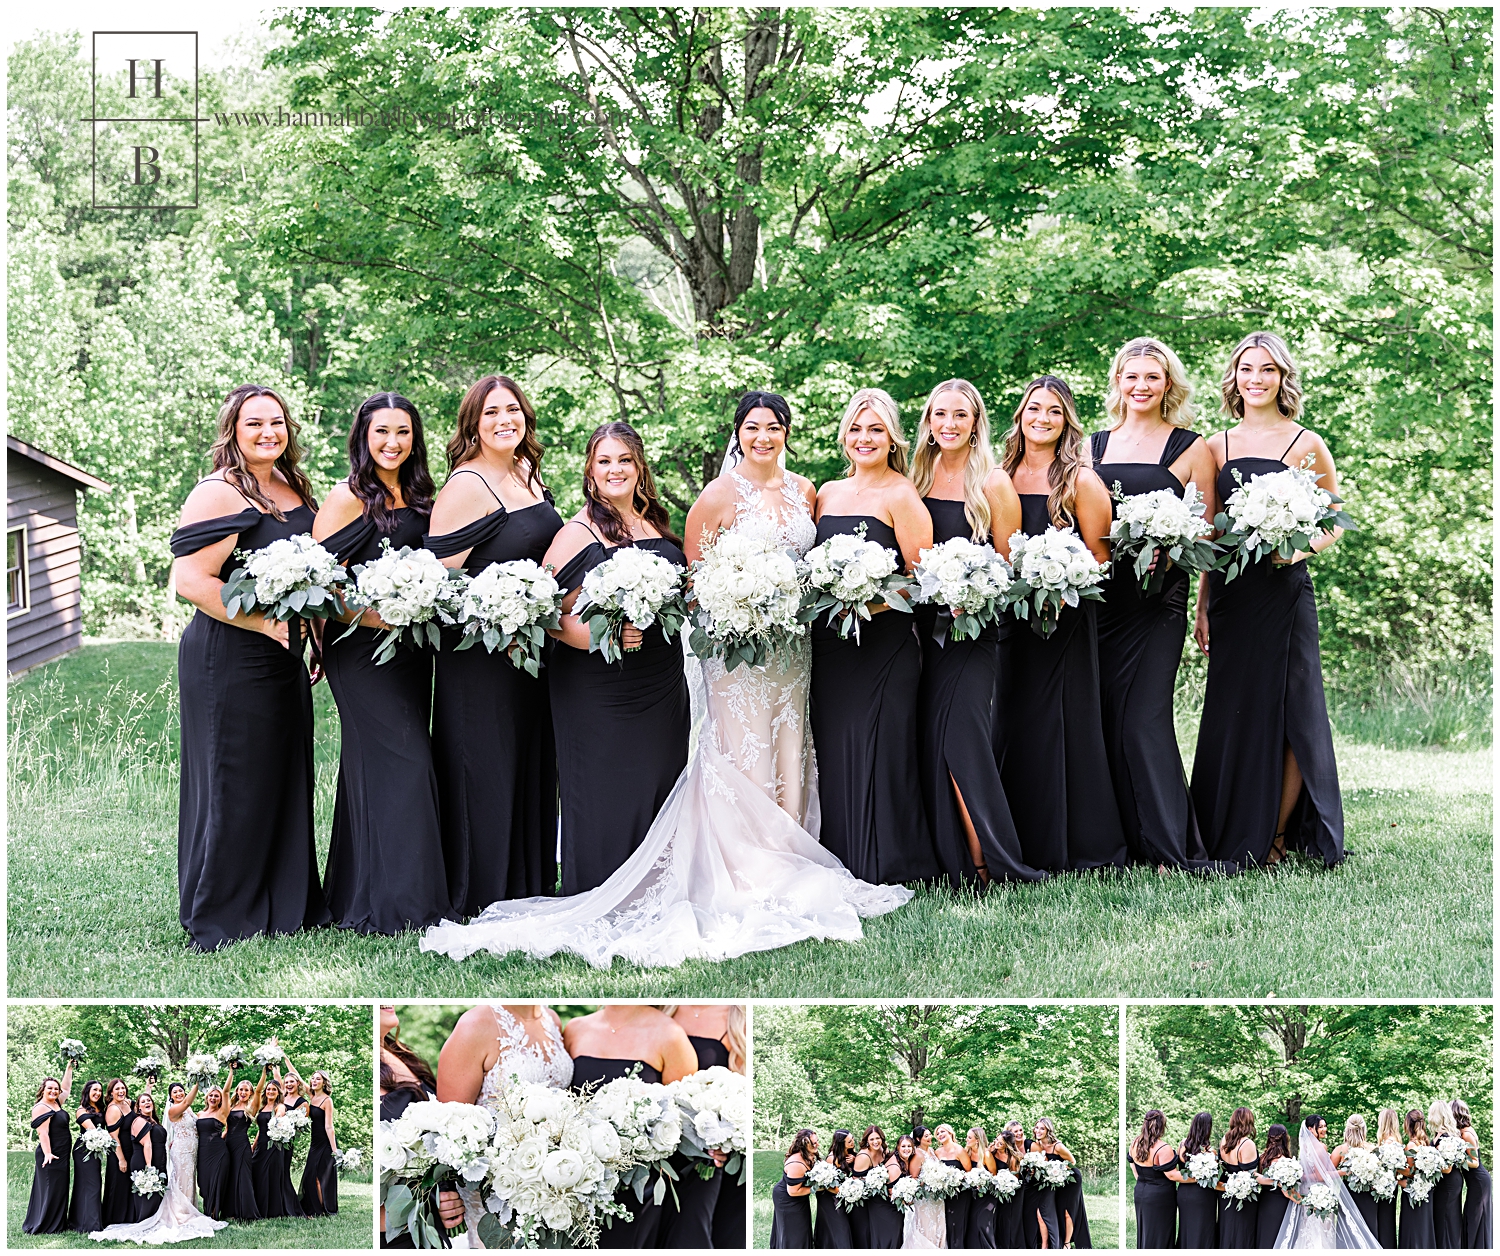 Bridesmaids in black dresses pose with bride for group shots.